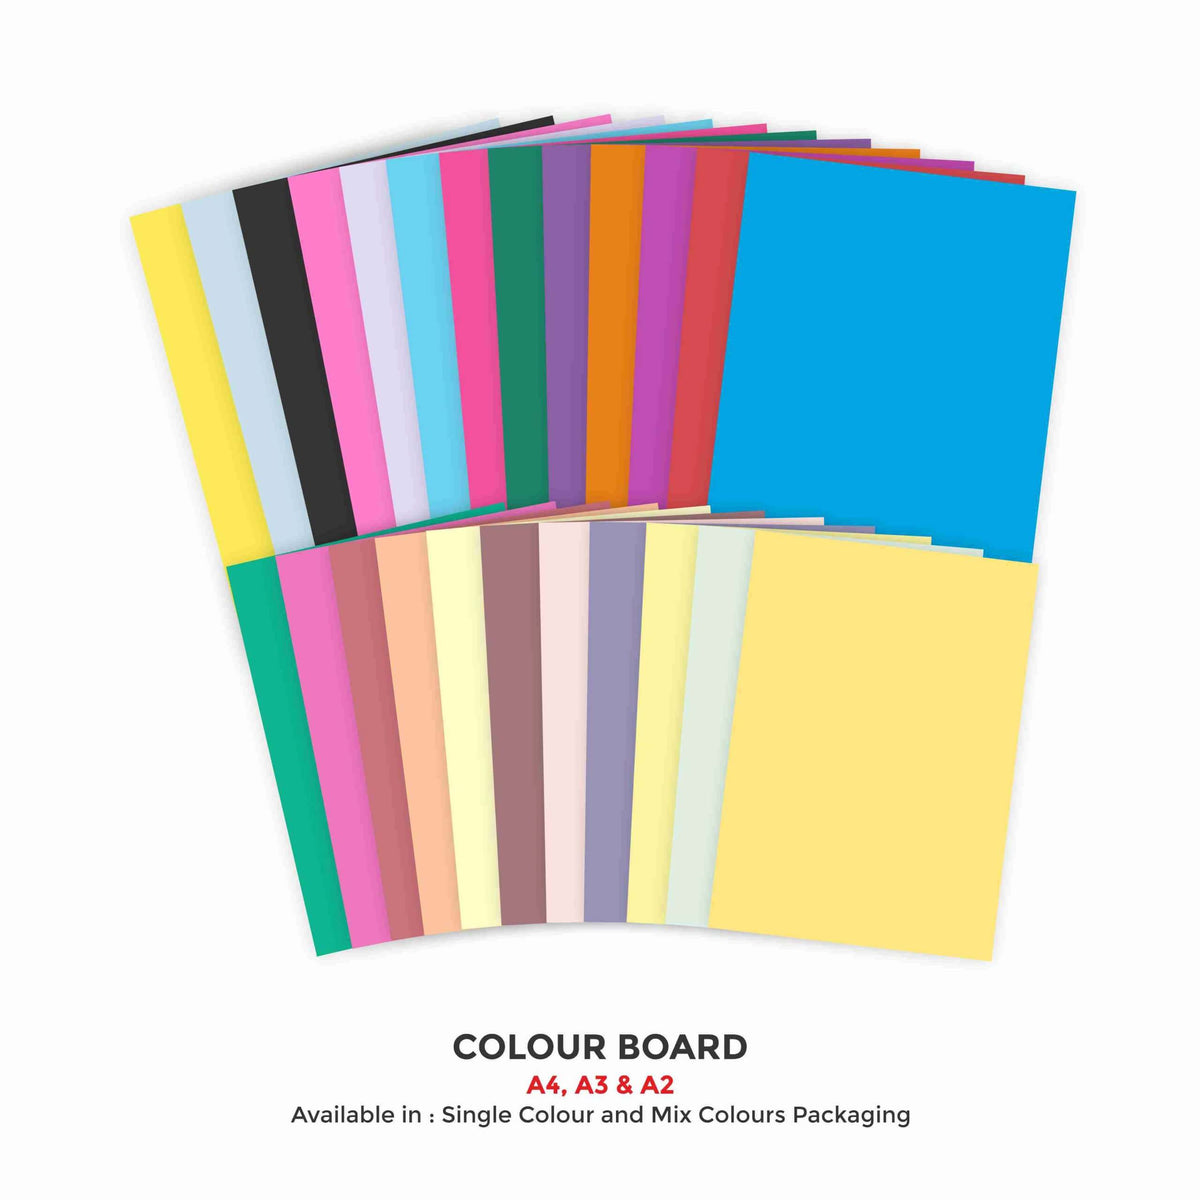 Coloured Paper (Ruled-Thick) - Pack of 20 Color Sheets in A4 size (Suitable for Drawing & Sketching) 150 GSM